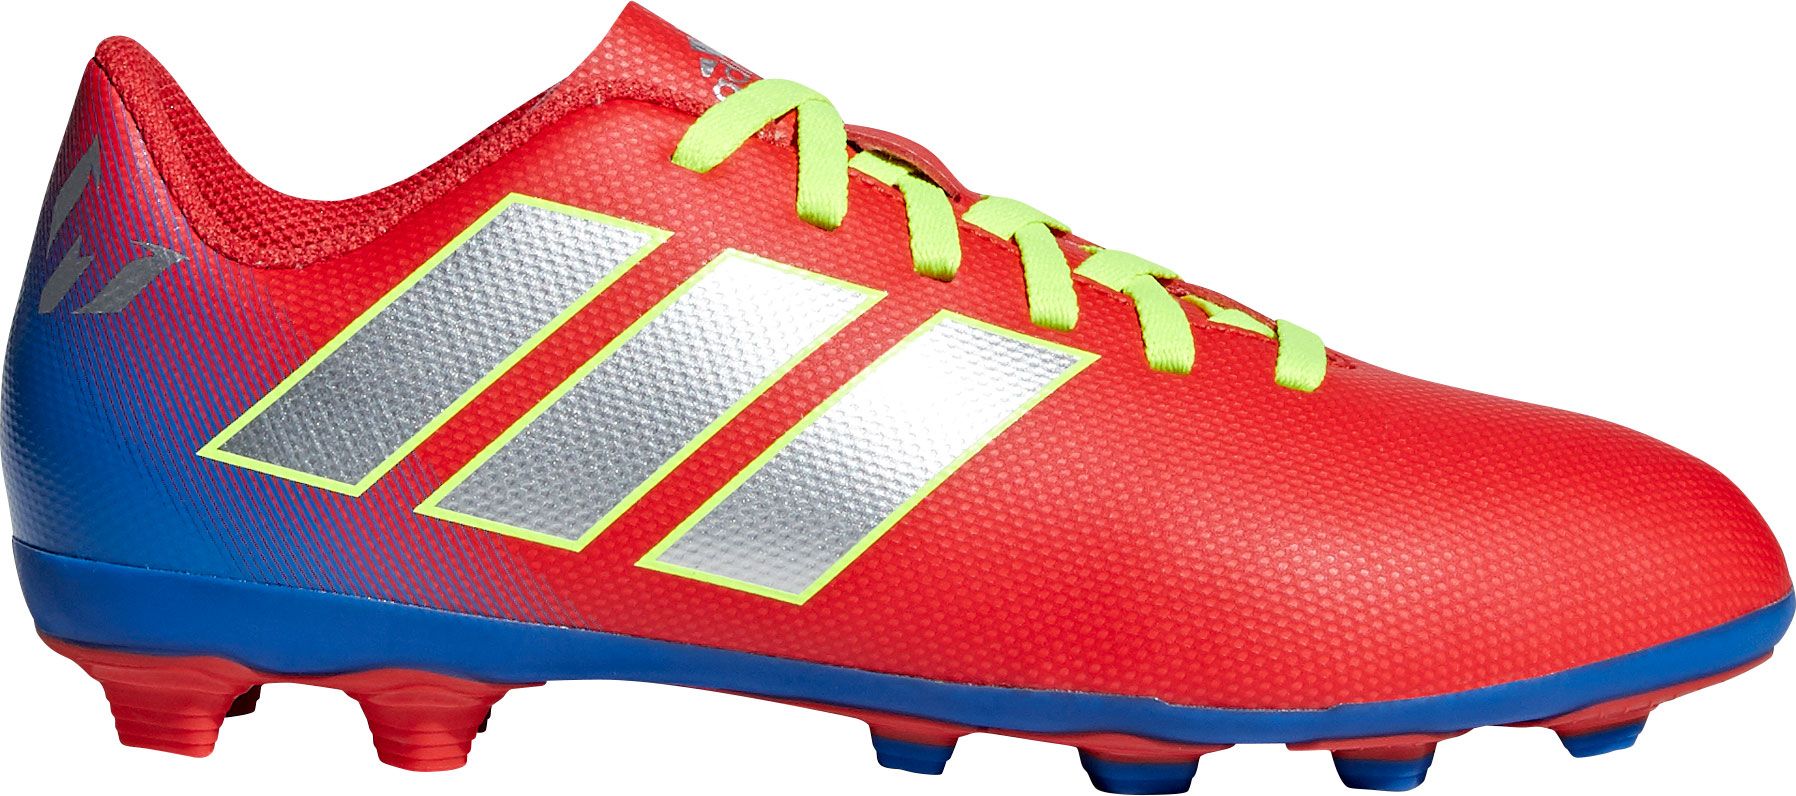 boys messi cleats